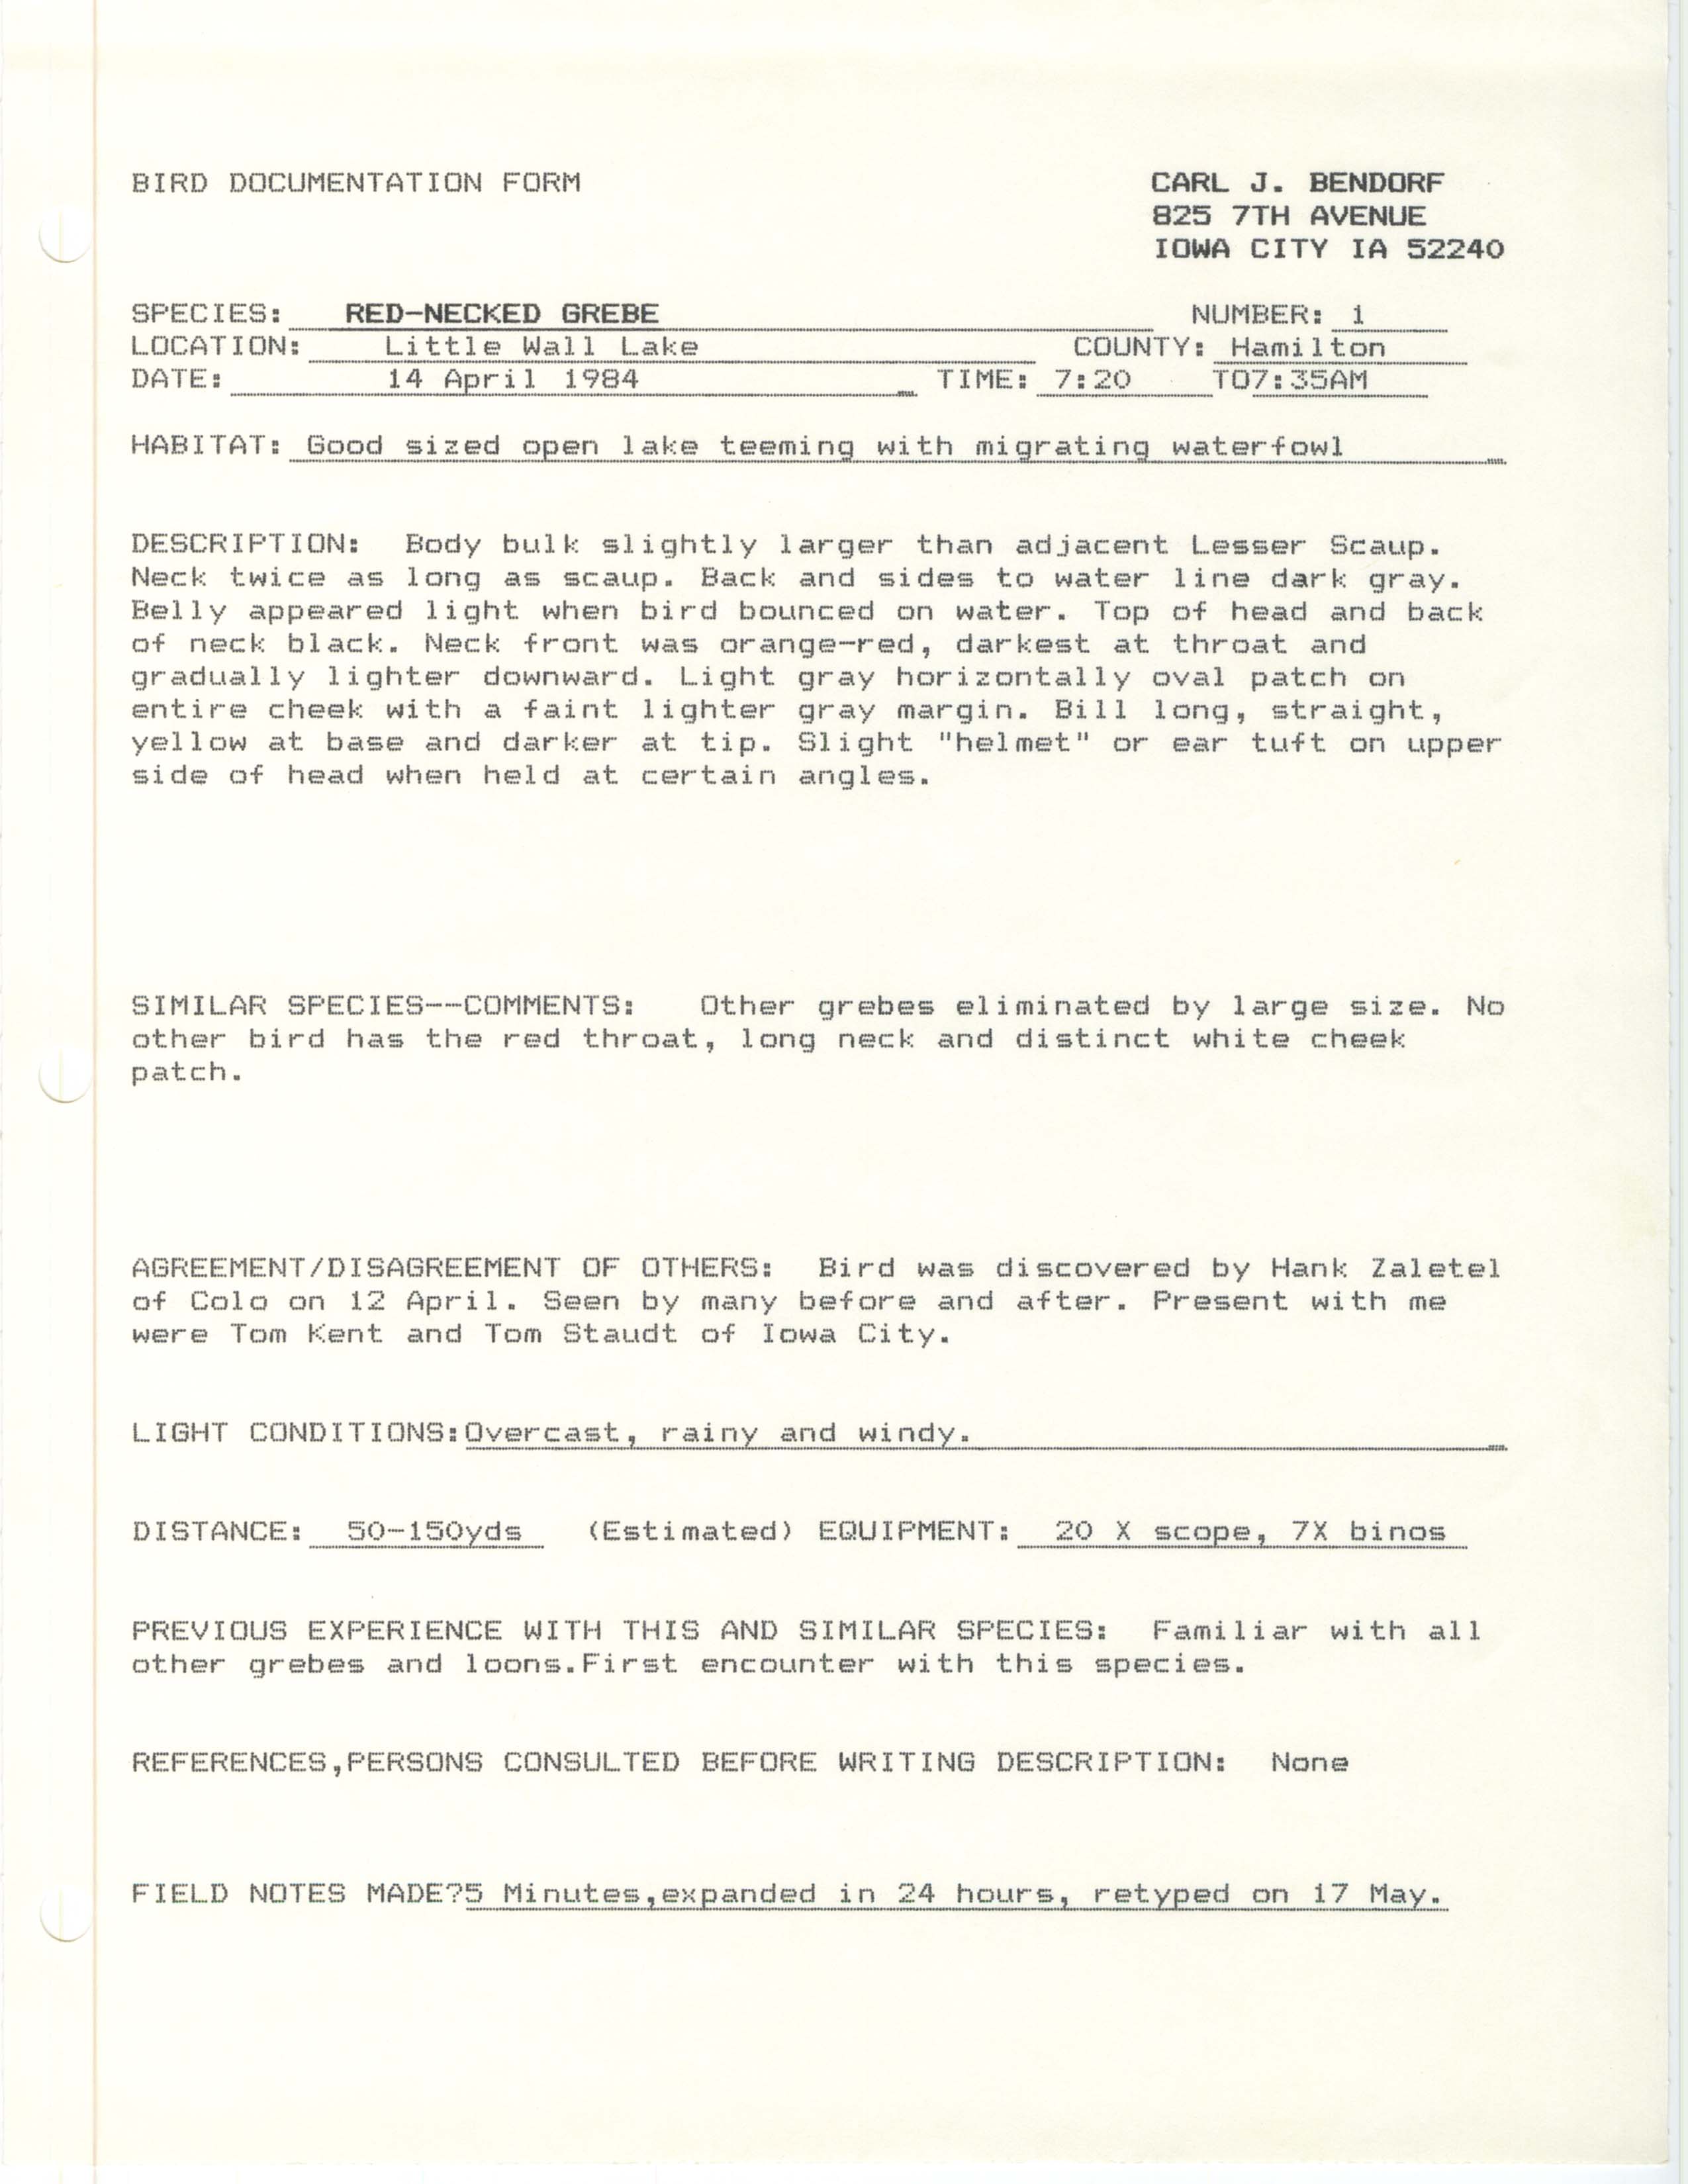 Rare bird documentation form for Red-necked Grebe at Little Wall Lake in 1984